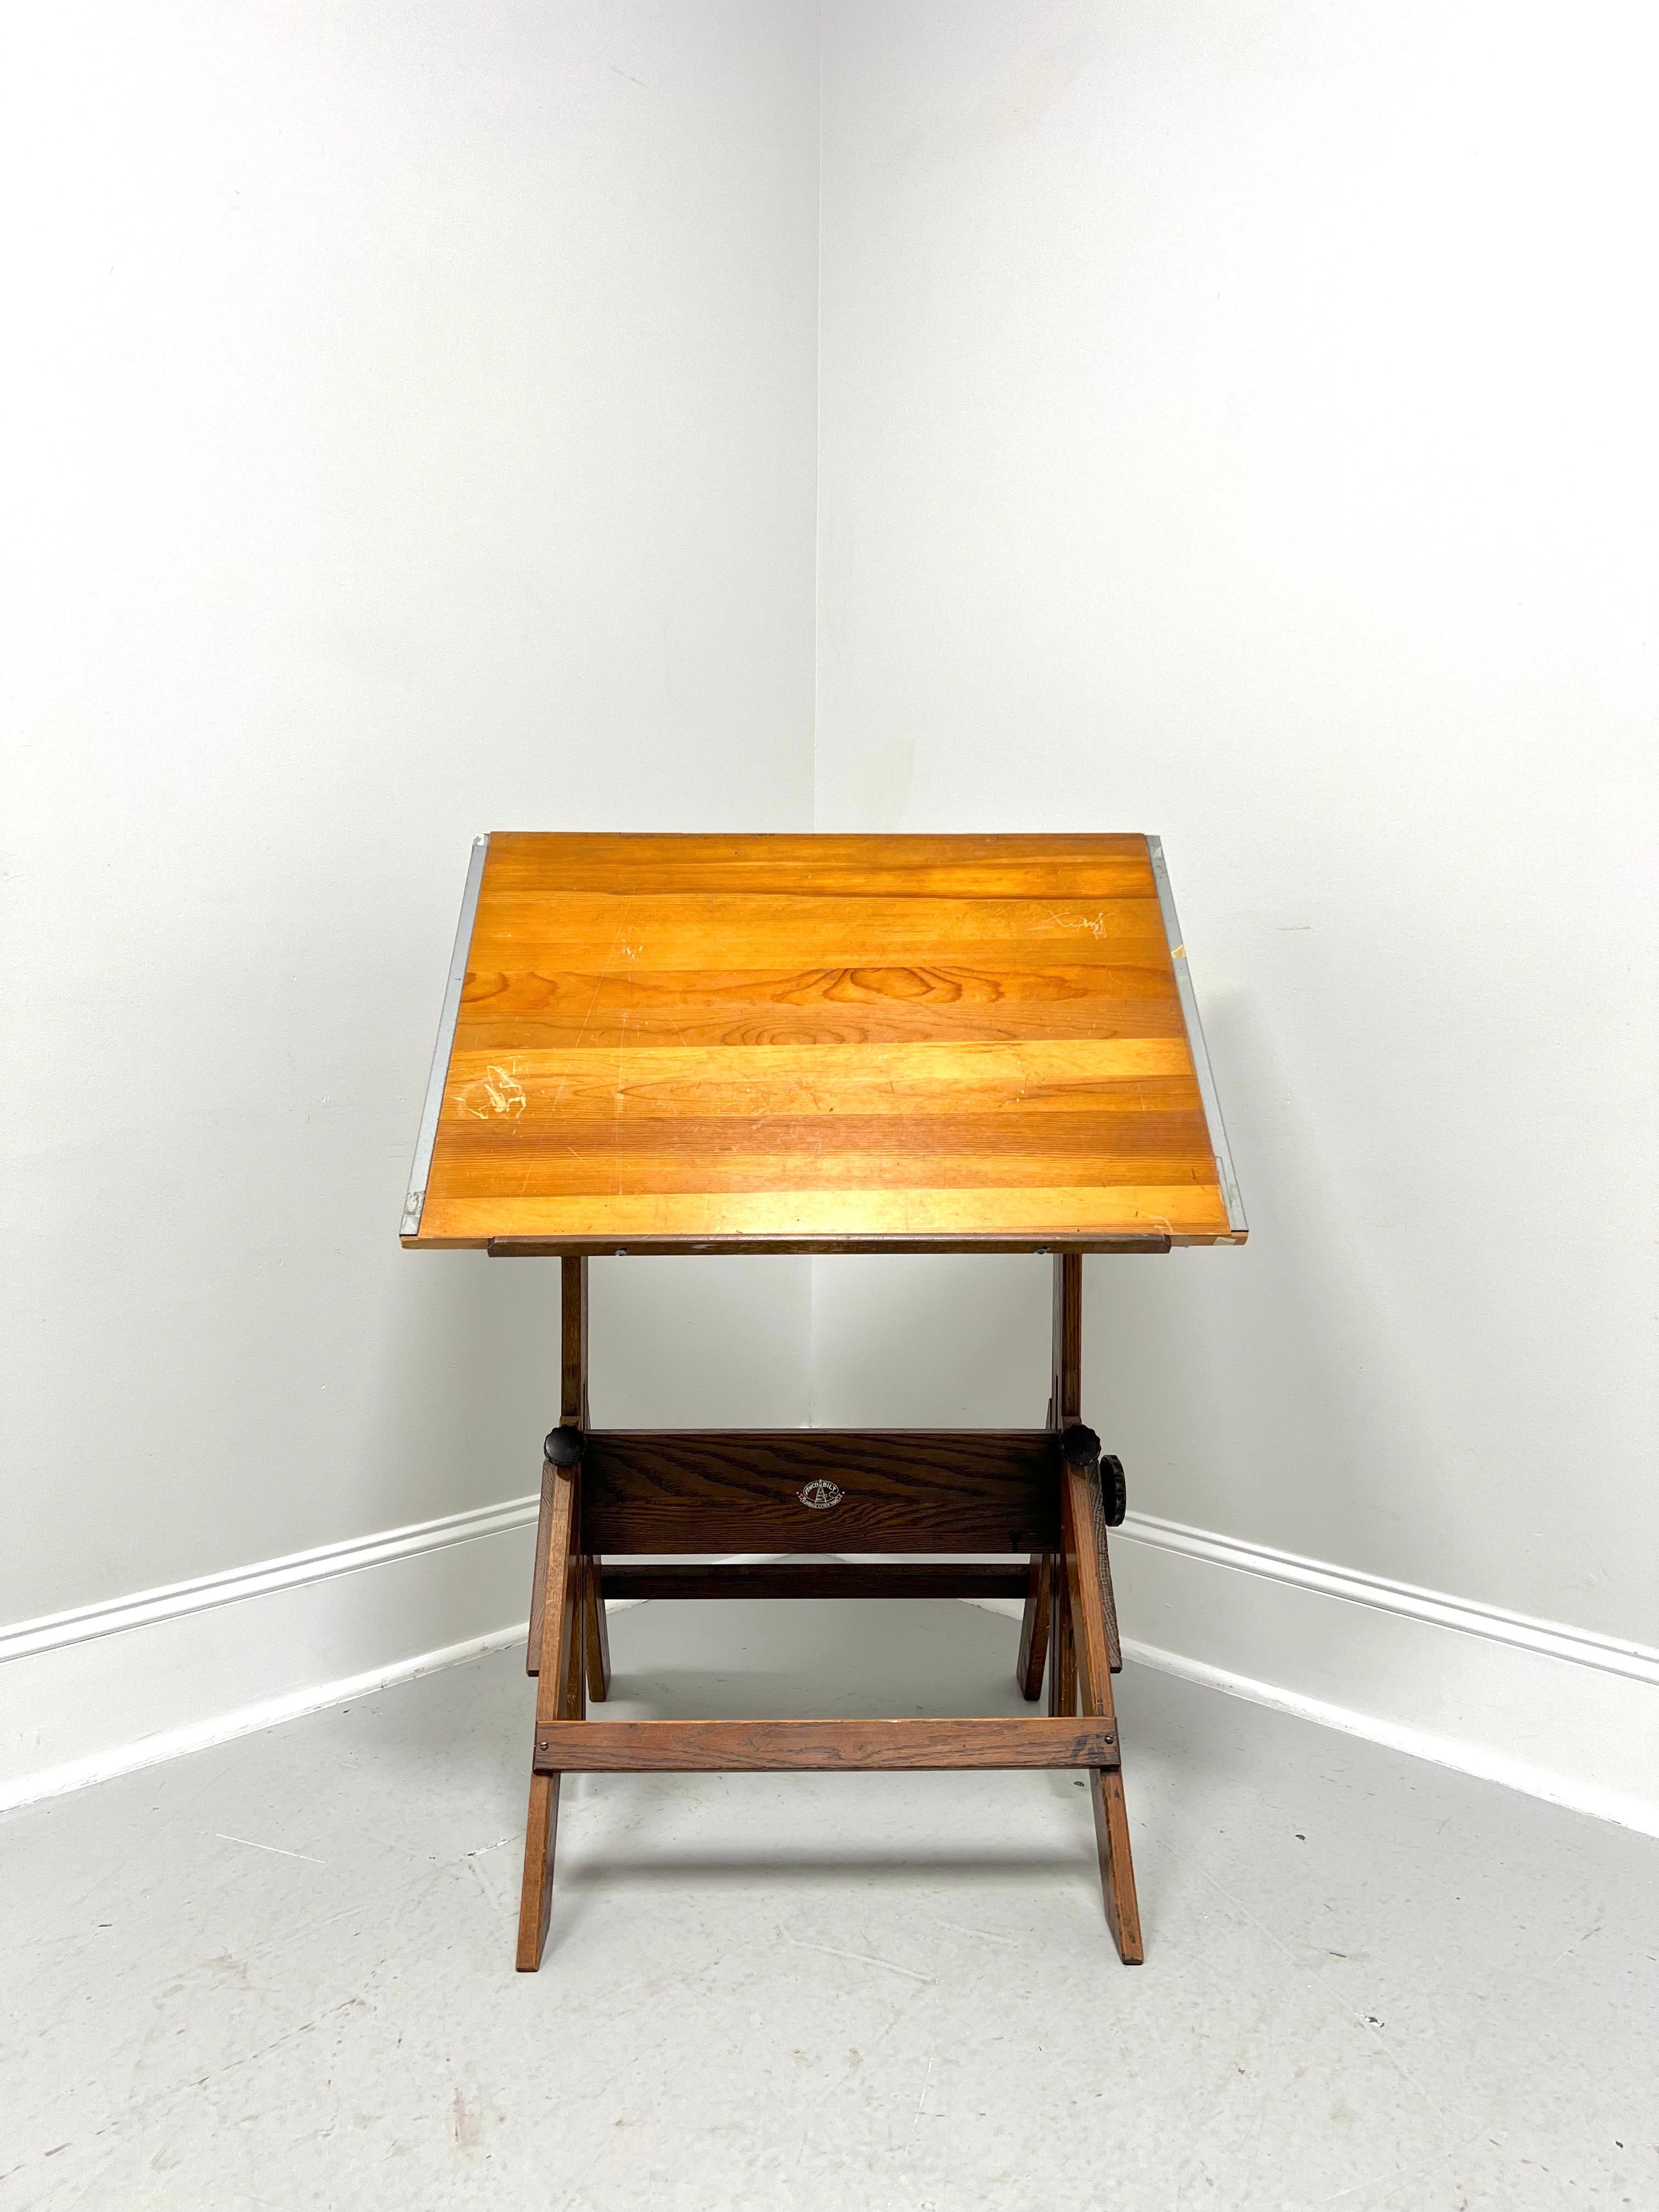 used drafting table for sale